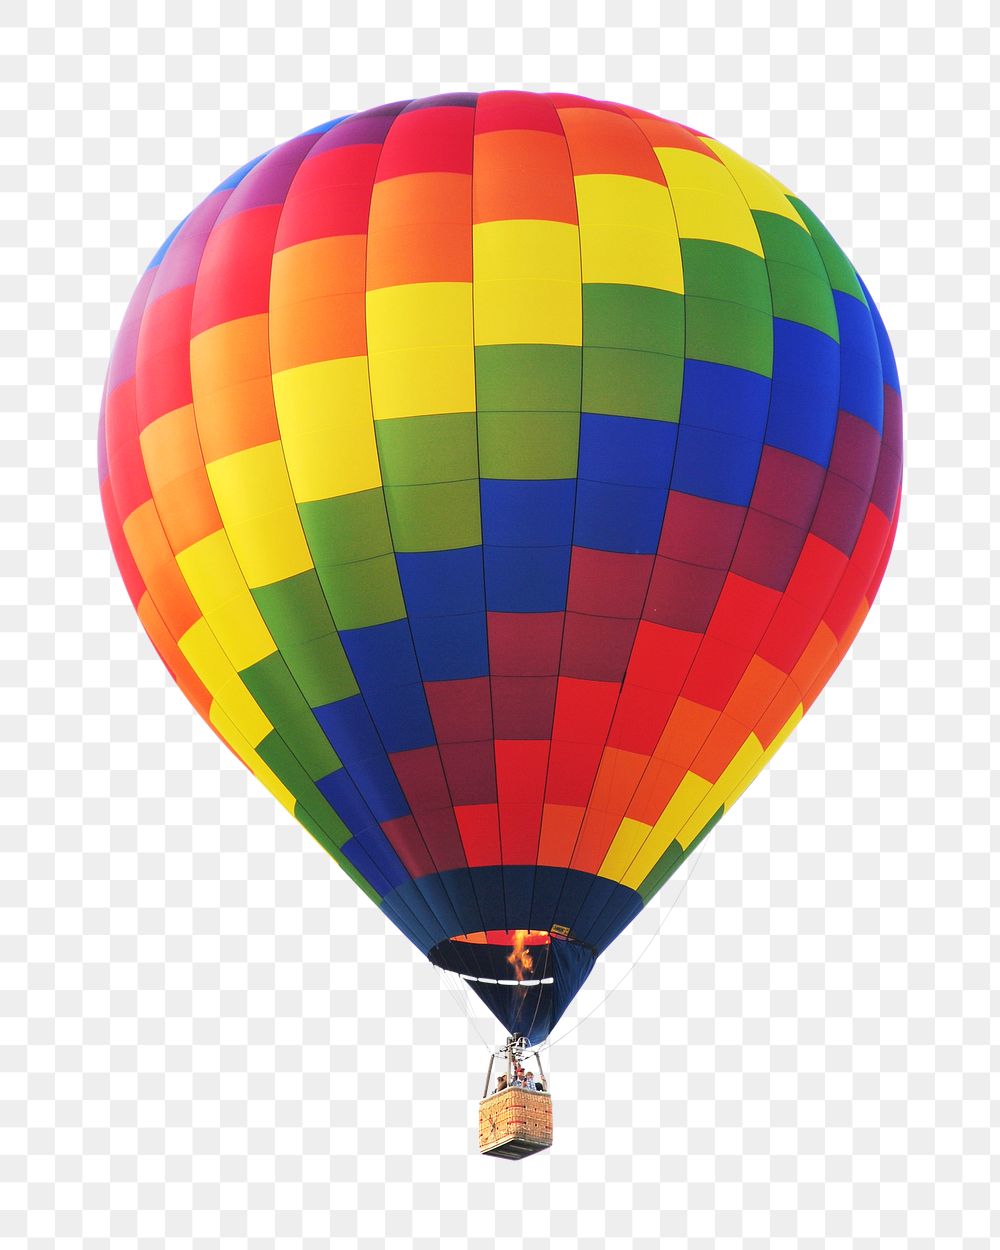 Flying air balloon png, transparent background